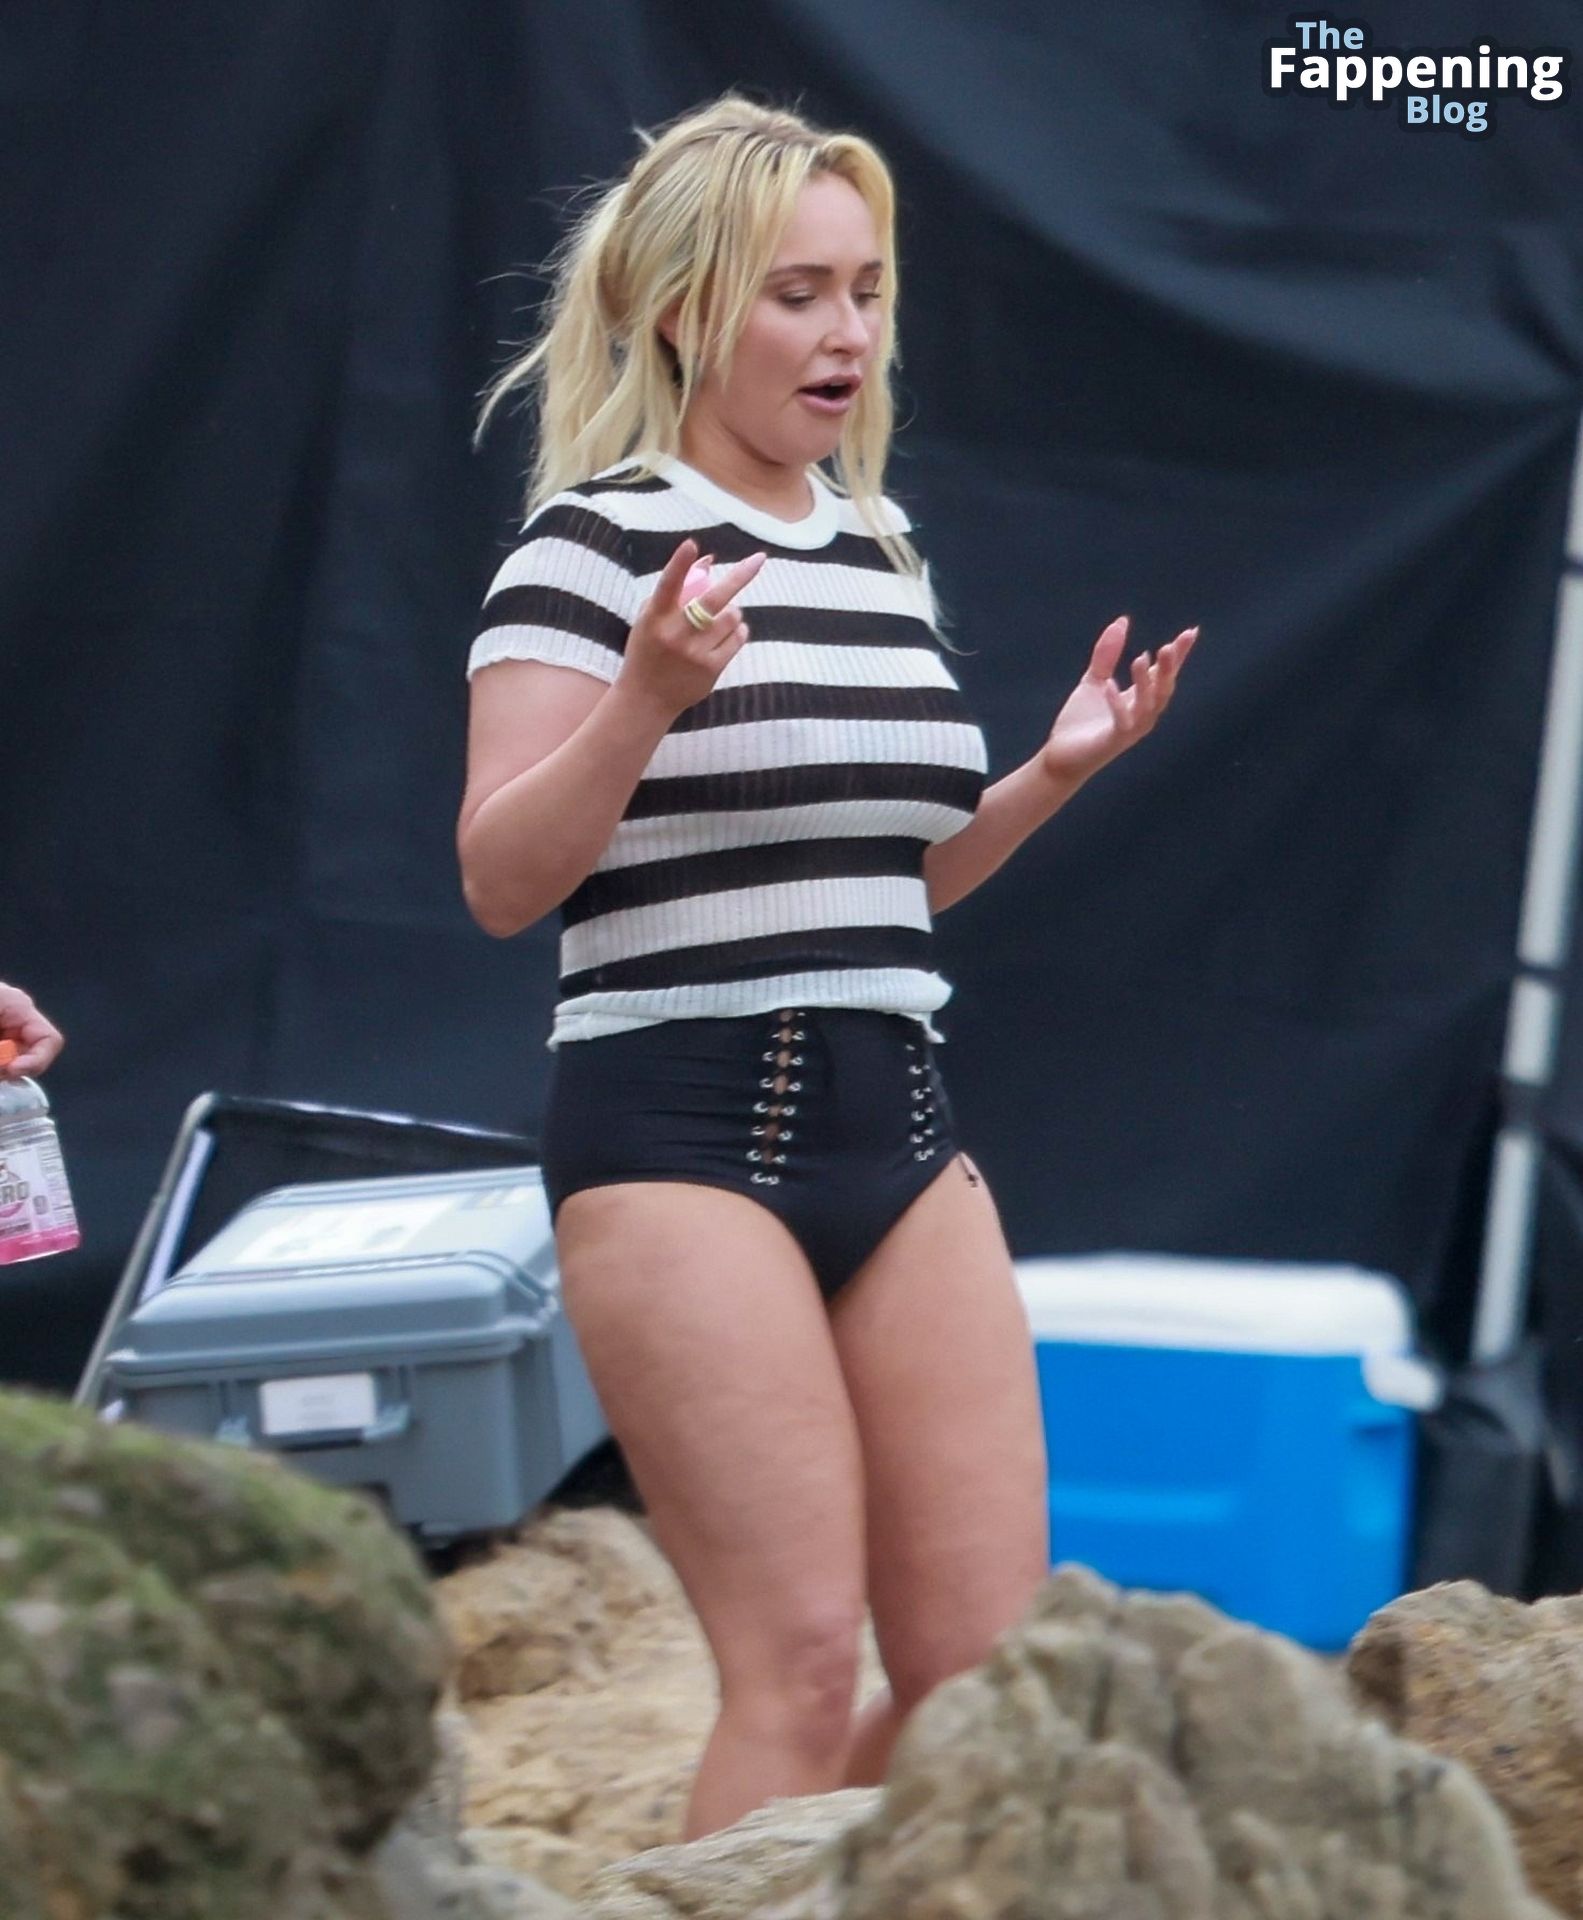 Hayden-Panettiere-Sexy-The-Fappening-Blog-8.jpg